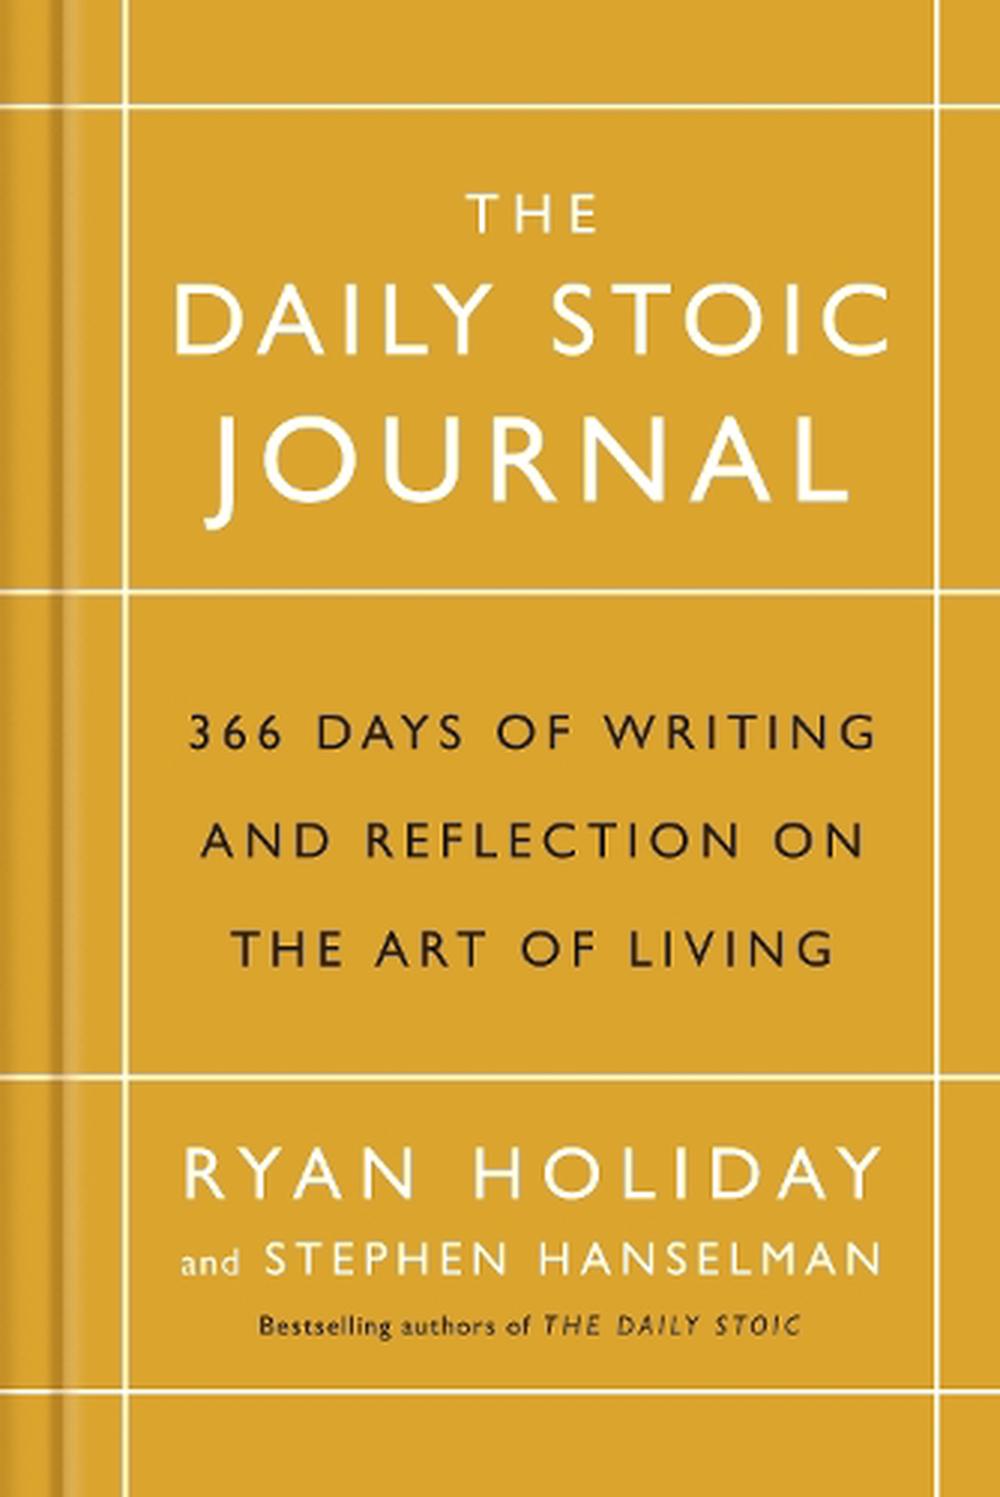 Daily Stoic Journal by Ryan Holiday, Hardcover, 9781788160230 Buy